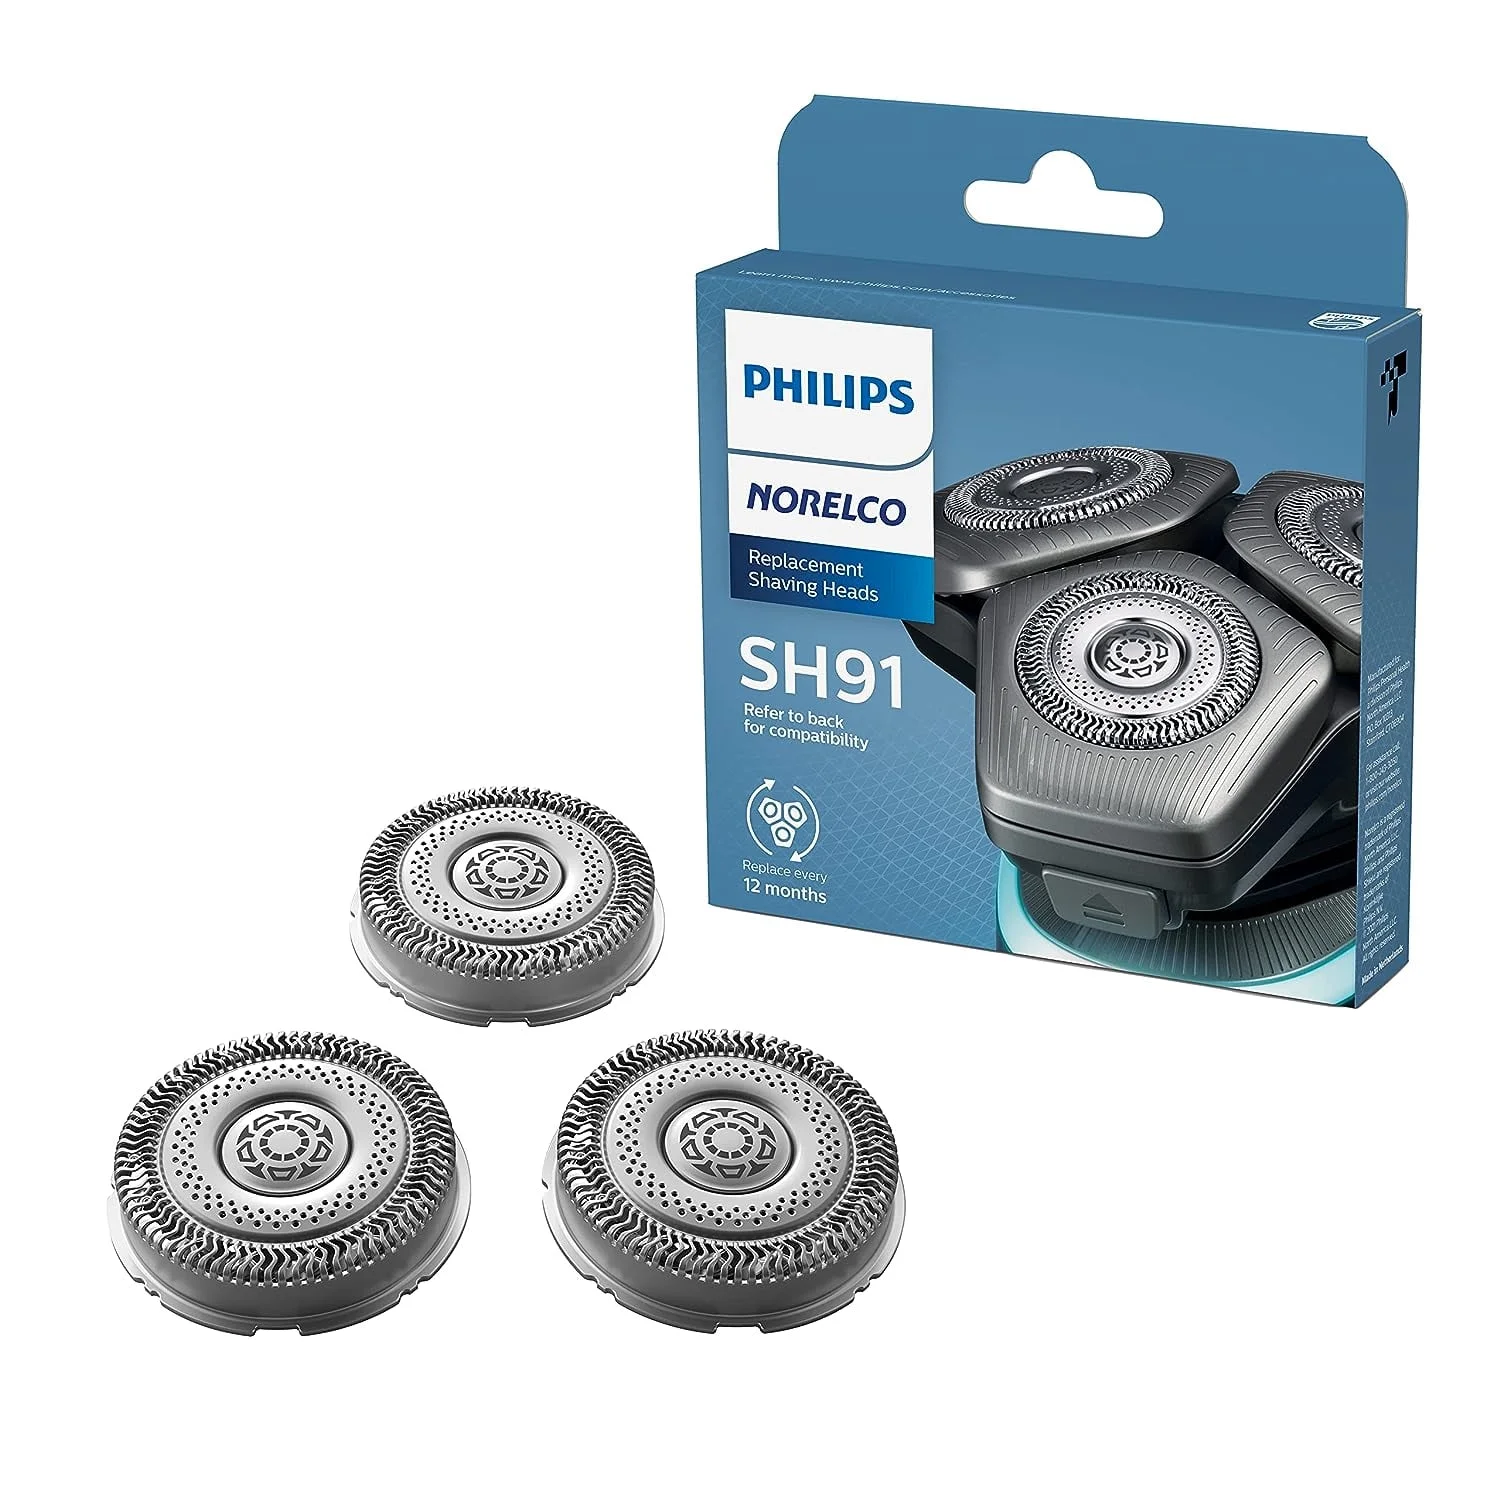 A package of three philips norelco shaving heads.